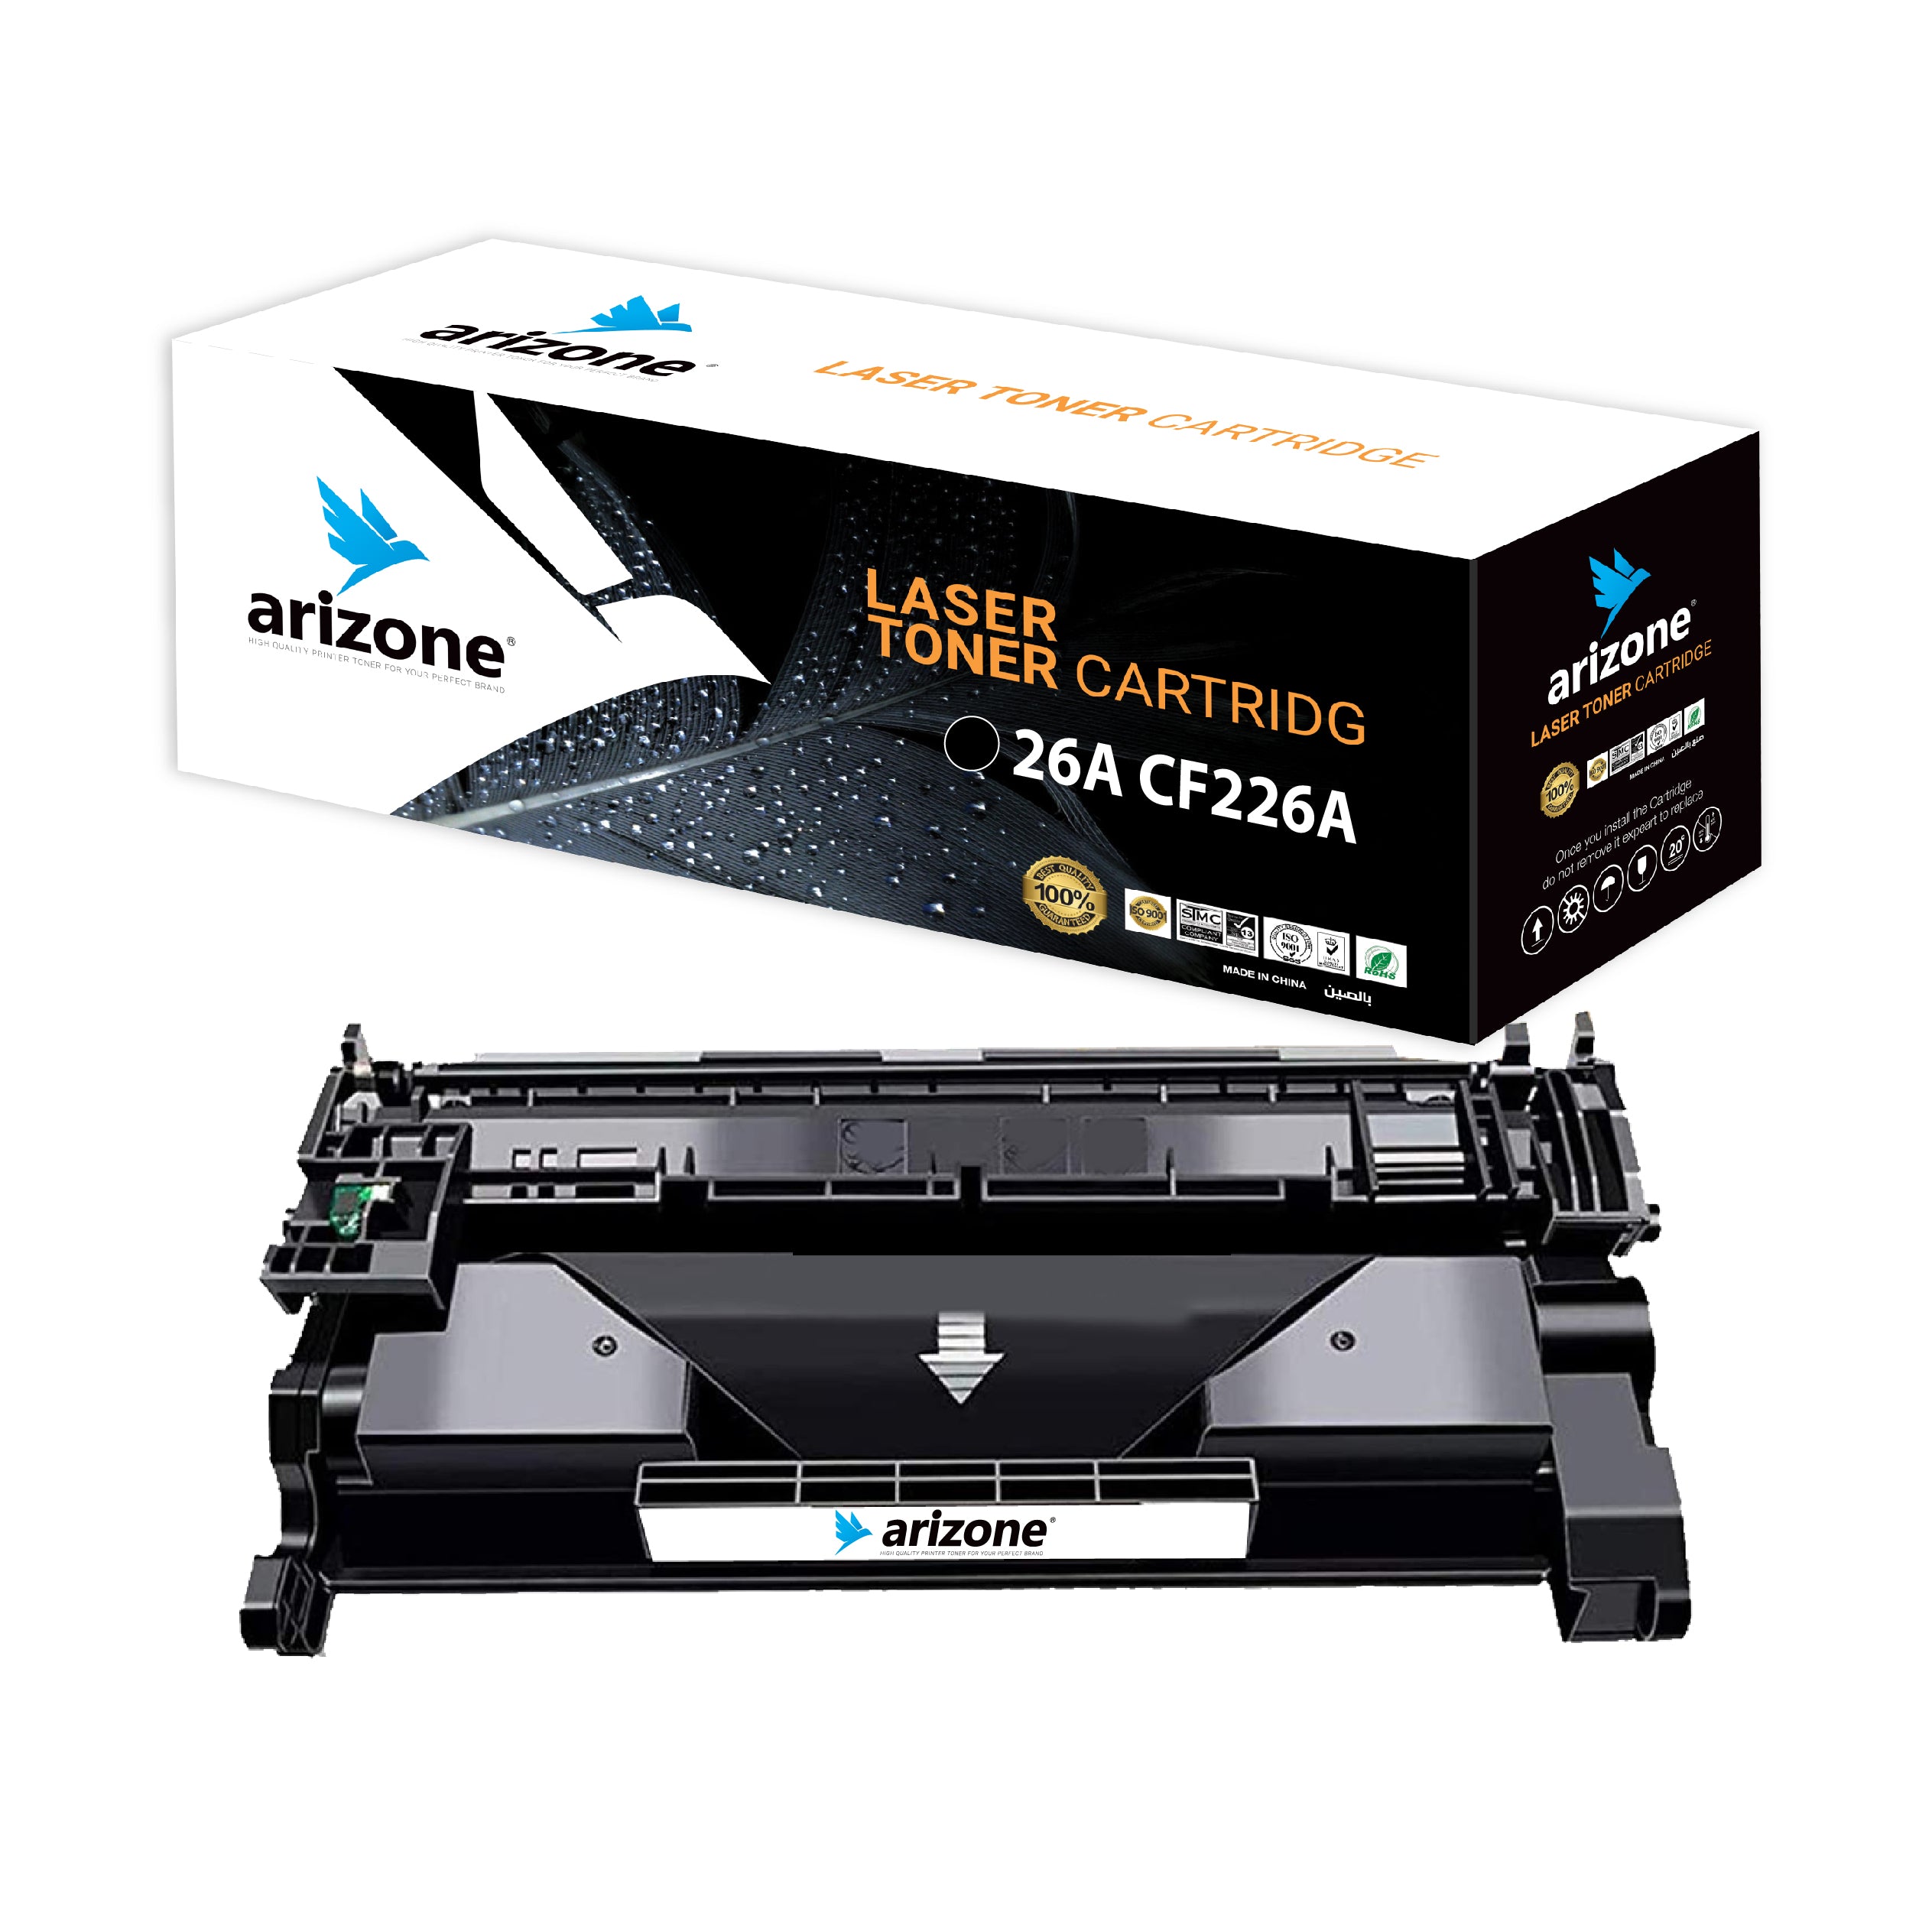 Arizone Toner Cartridge Replacement for HP 26A Cartridge for HP